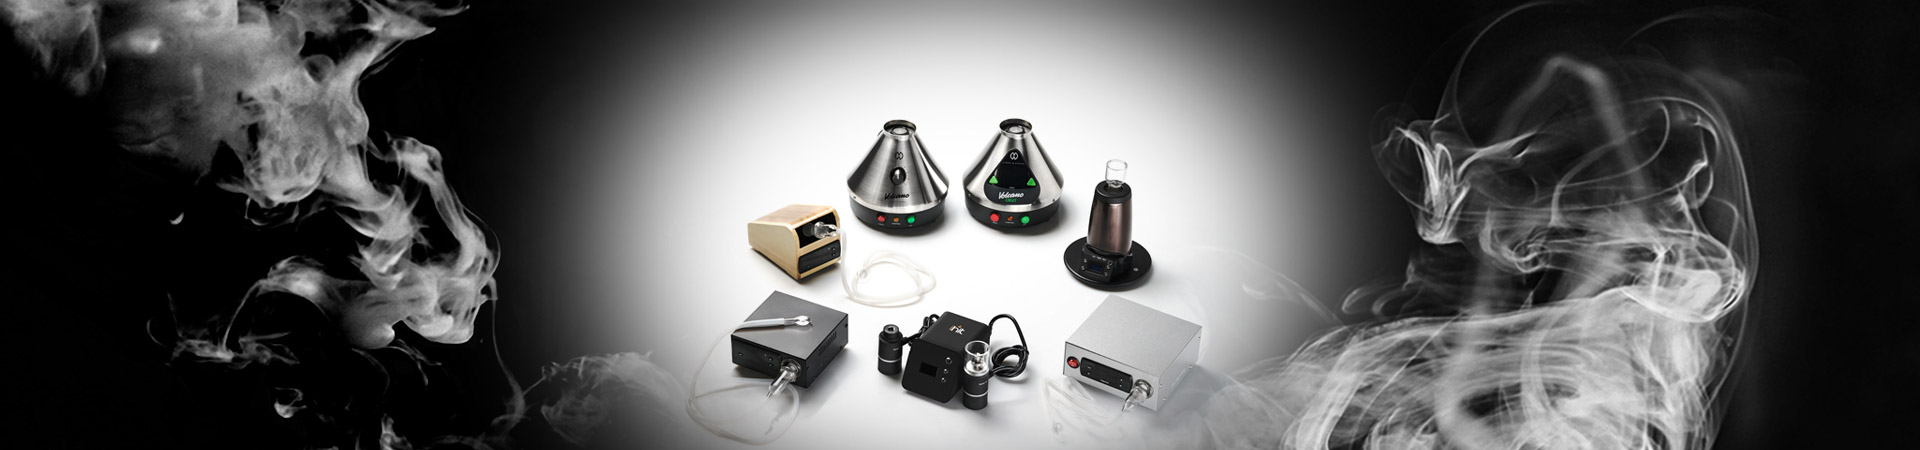 Vaporizer accessories – Everything that you could need to vaporise